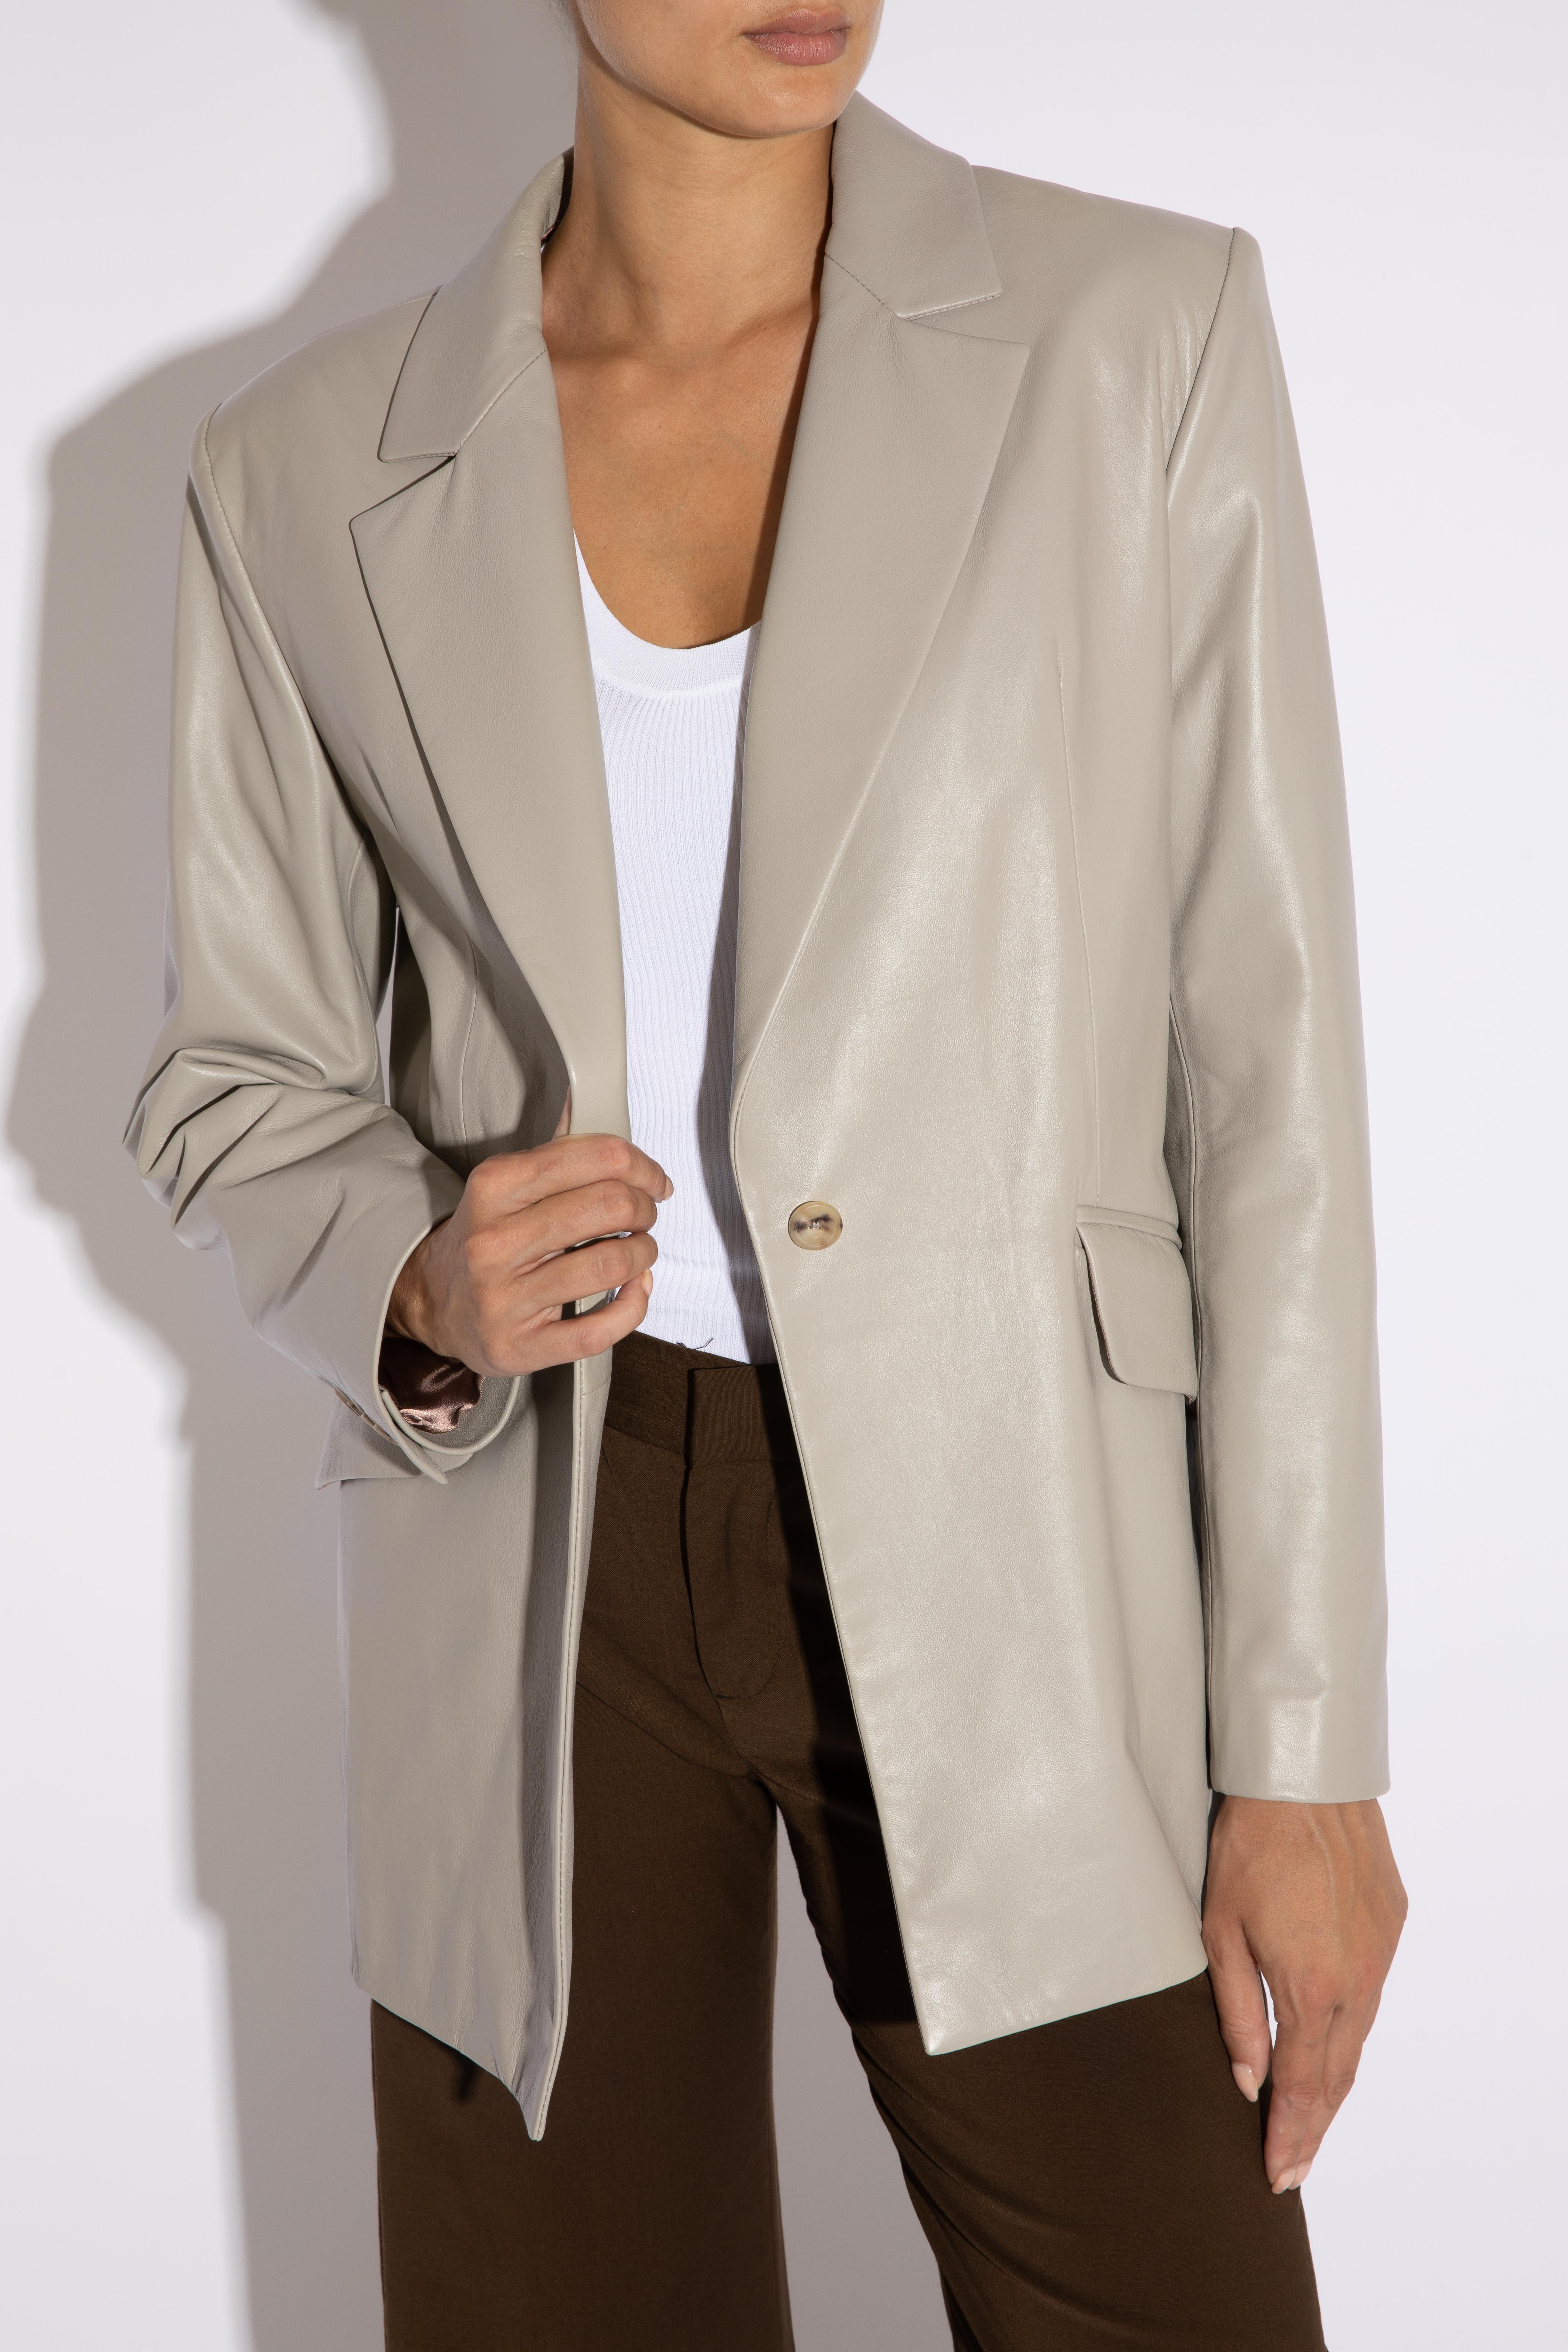 Verheyen London Chesca Oversize Blazer in Stone Grey Leather, Size 8

Handmade in London, made with lamb leather this luxury item is an investment piece to wear for a lifetime.  Made with an oversize fit, its ideal for wearing with a jumper for